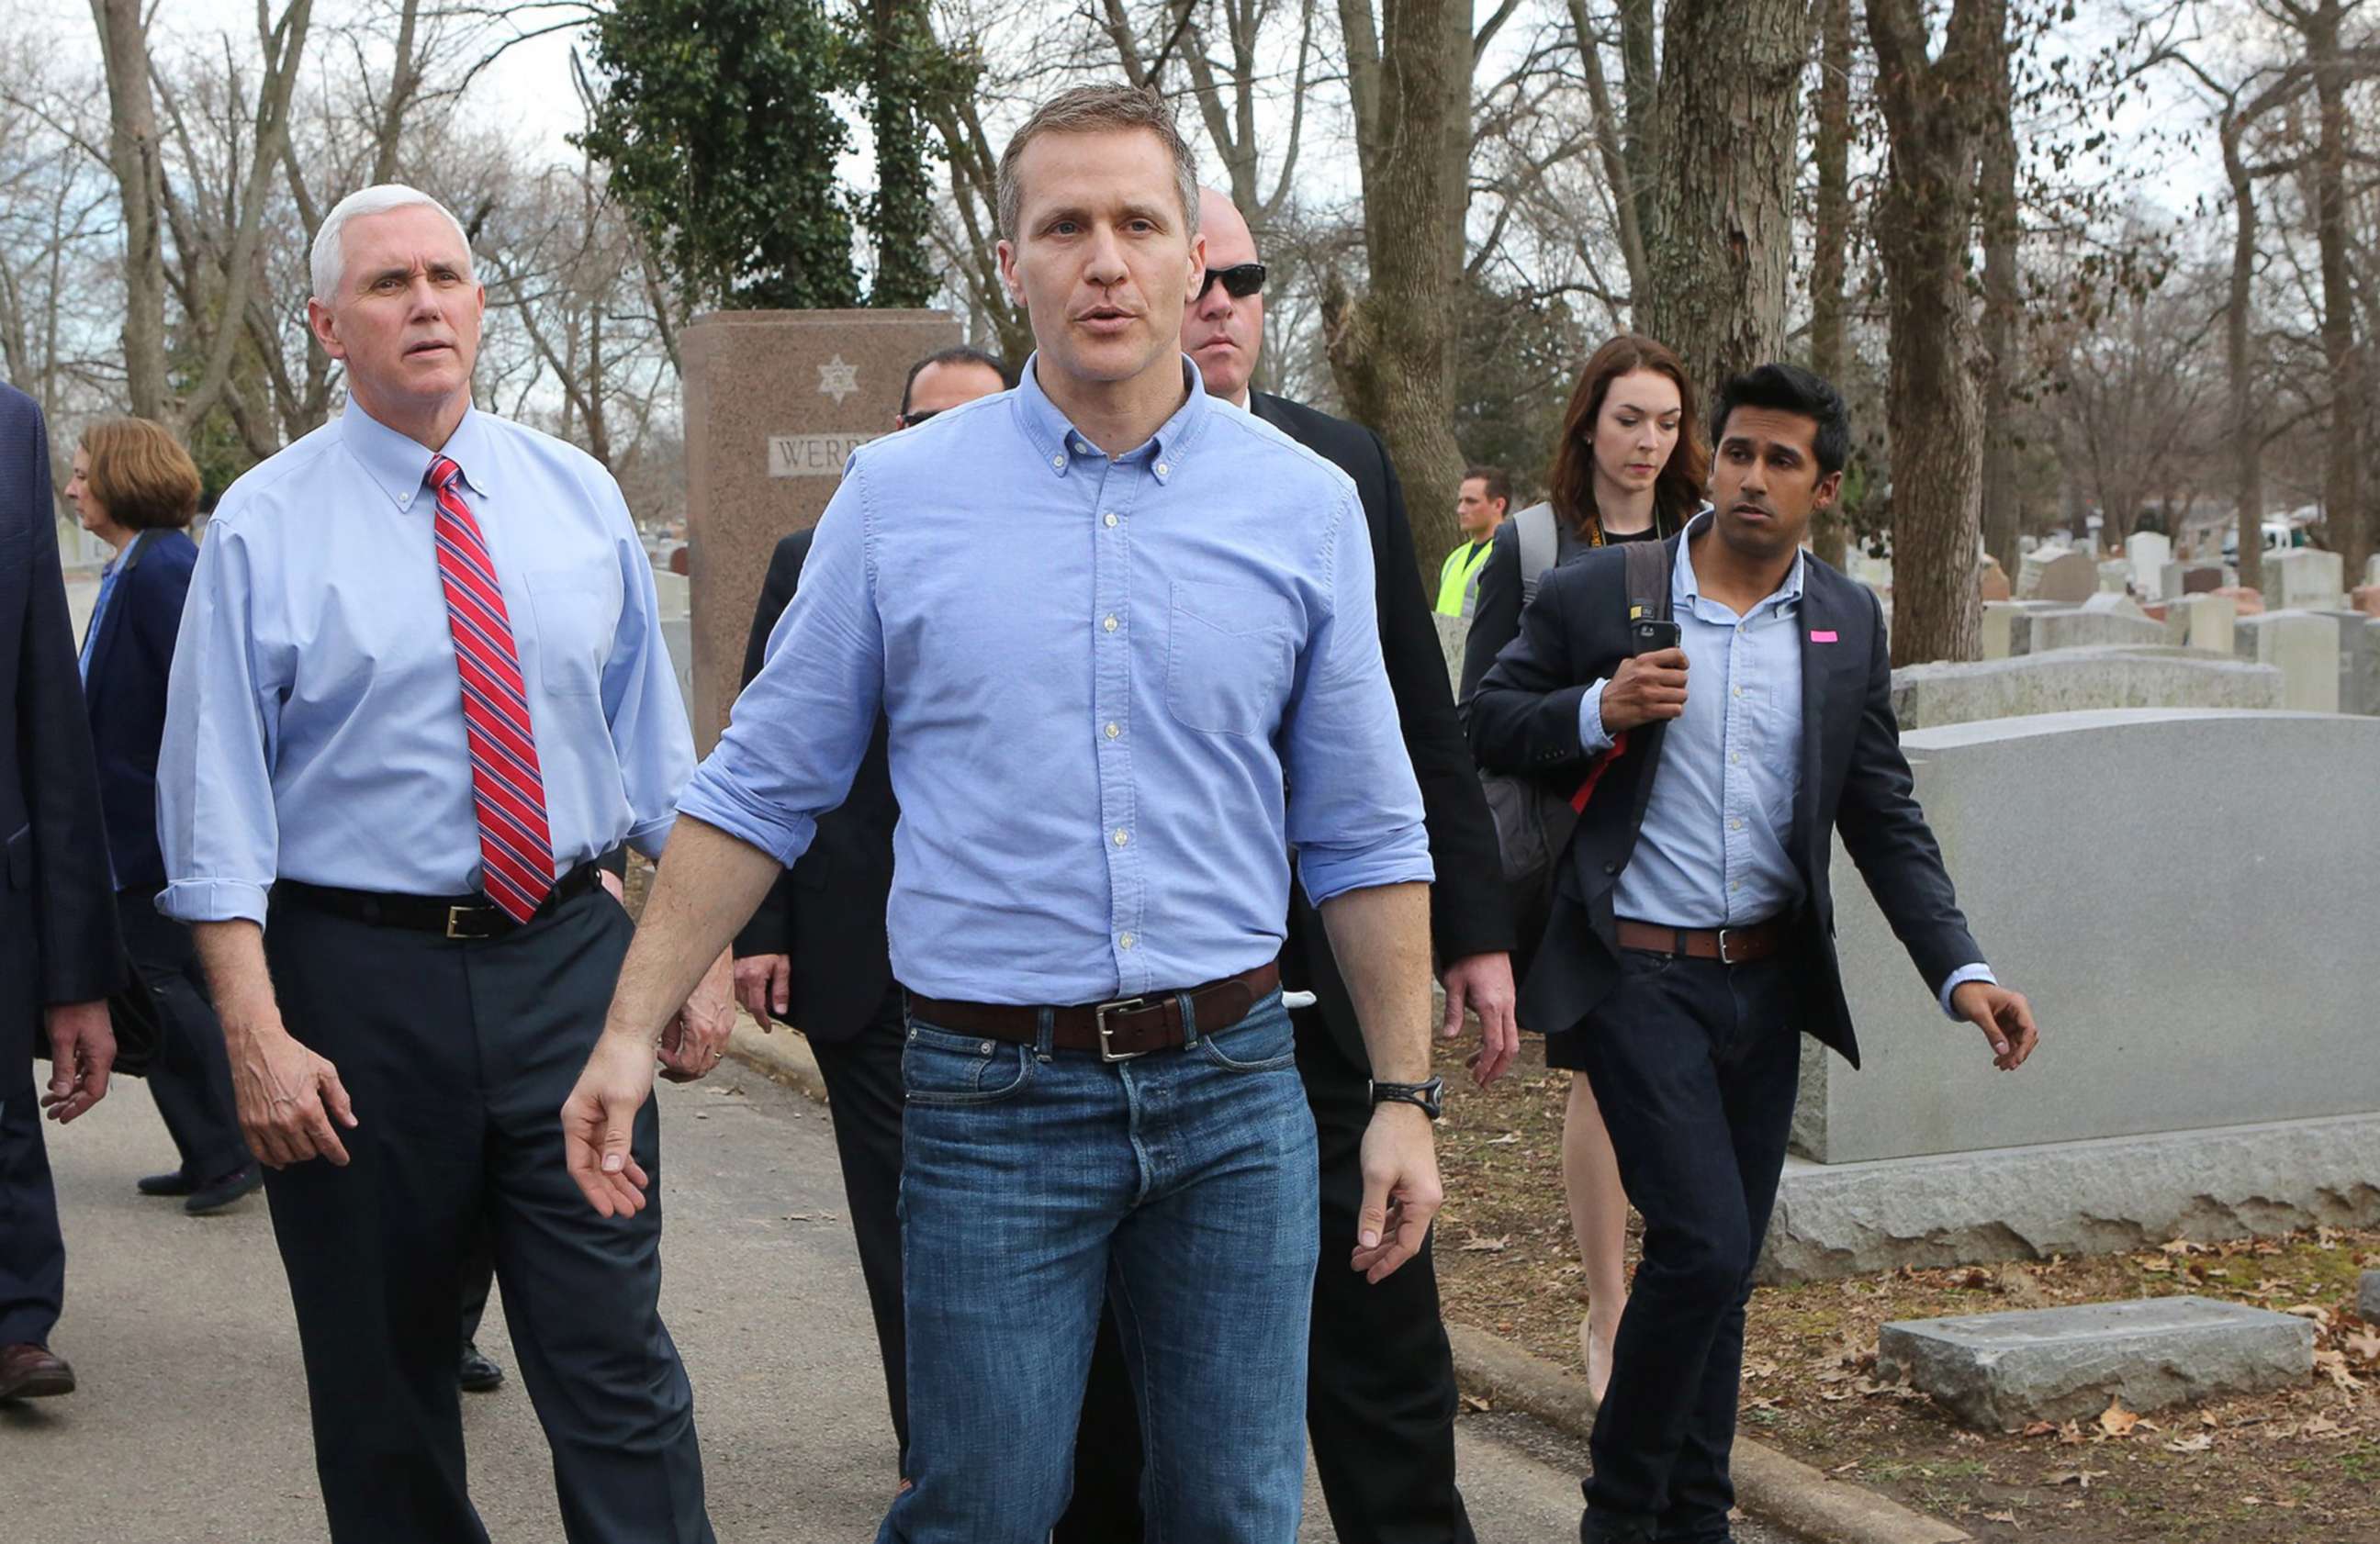 PHOTO: Vice President Mike Pence and Missouri Gov. Eric Greitens walk through the Chesed Shel Emeth Cemetery in University City, Mo., Feb. 22, 2017 in this file photo.